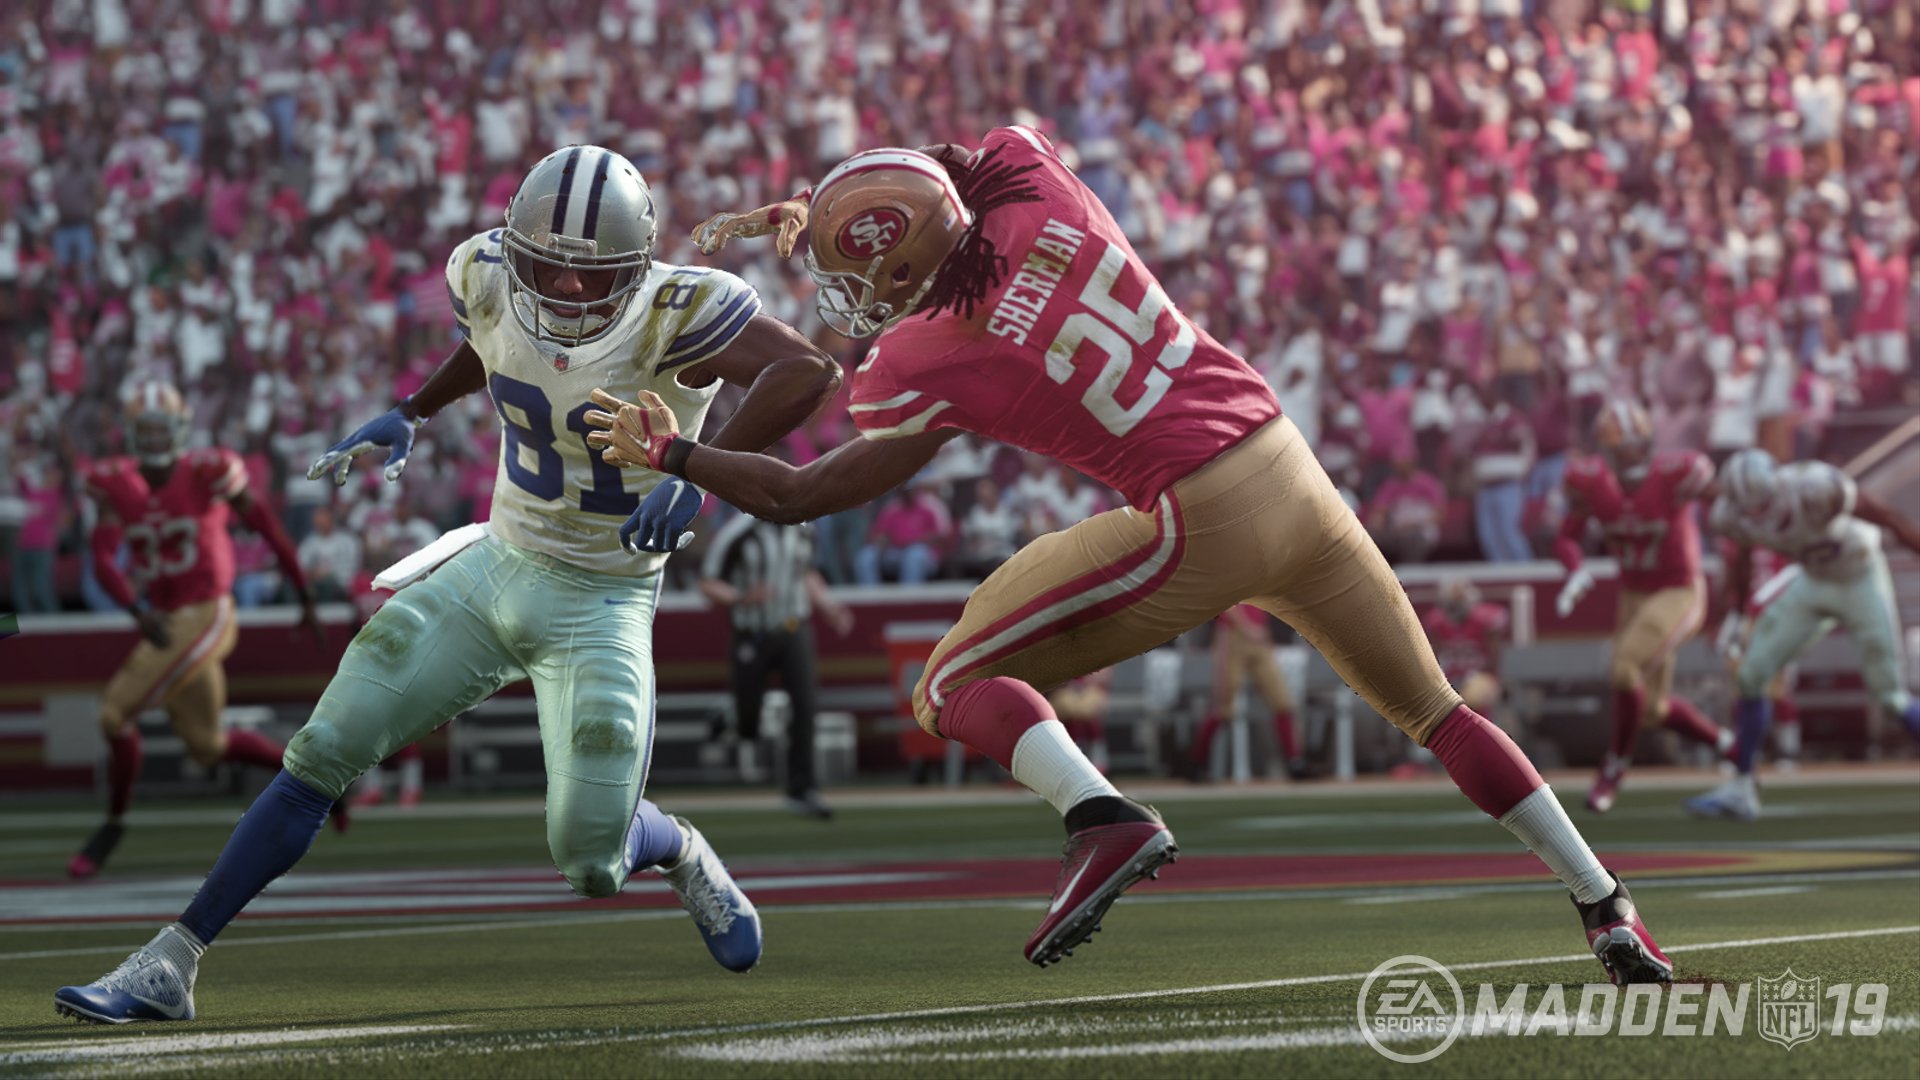 What you need to know about the Madden 19 release date.